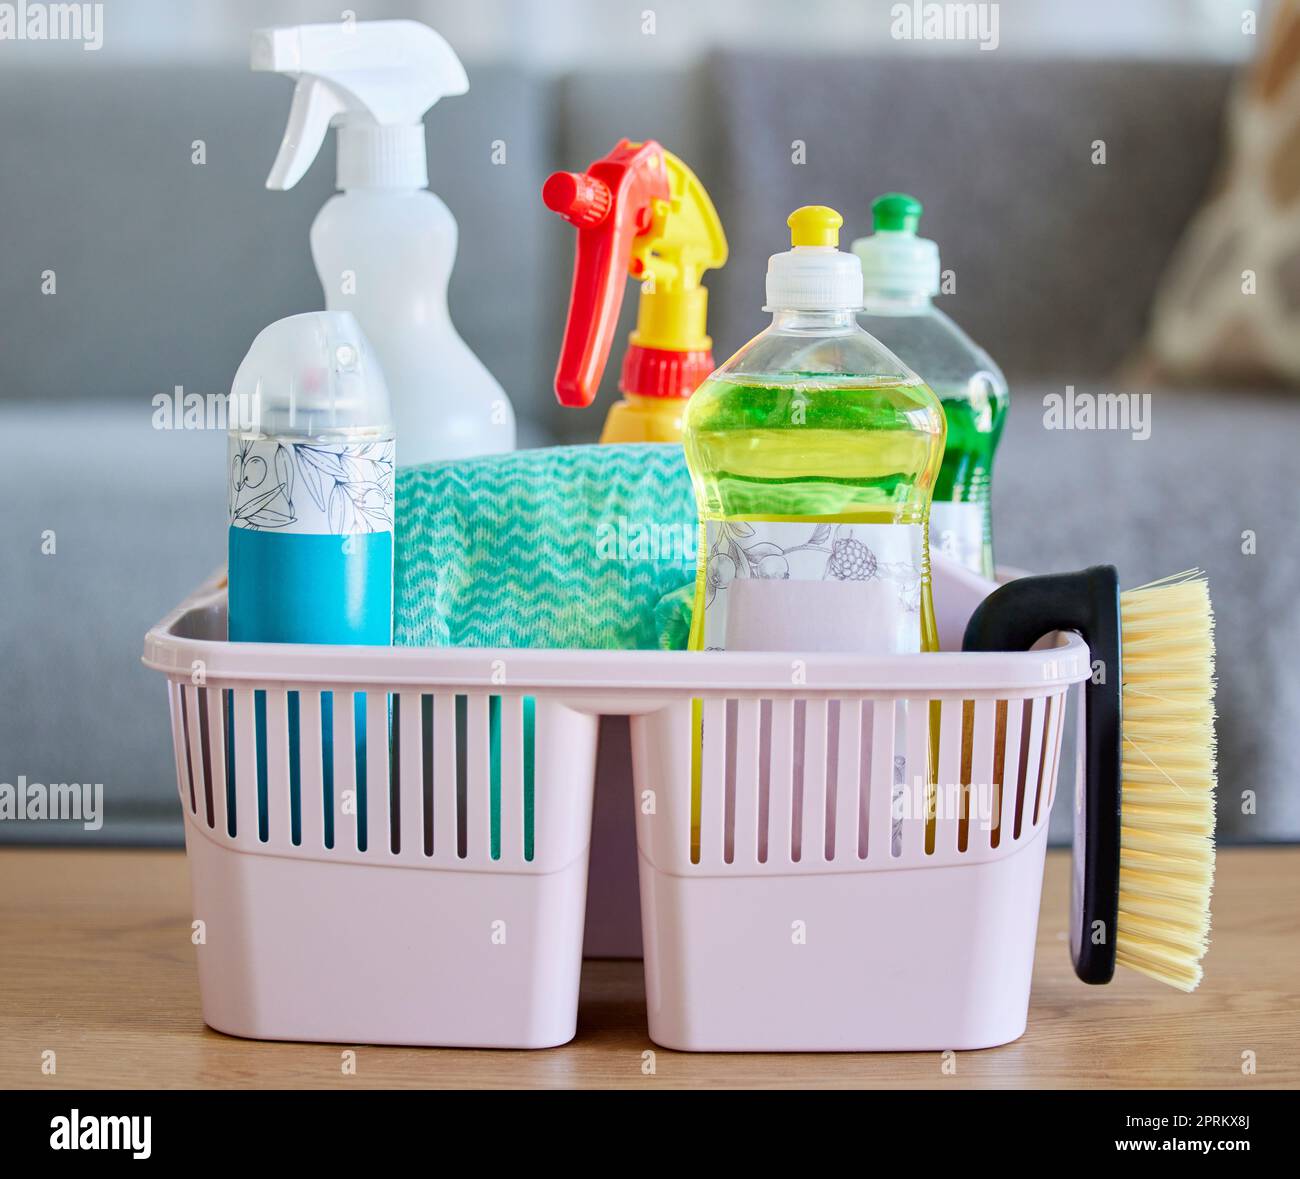 https://c8.alamy.com/comp/2PRKX8J/cleaning-supplies-brush-and-basket-tools-on-table-in-home-living-room-for-hygiene-cleaning-products-spring-cleaning-and-equipment-for-creating-germ-2PRKX8J.jpg